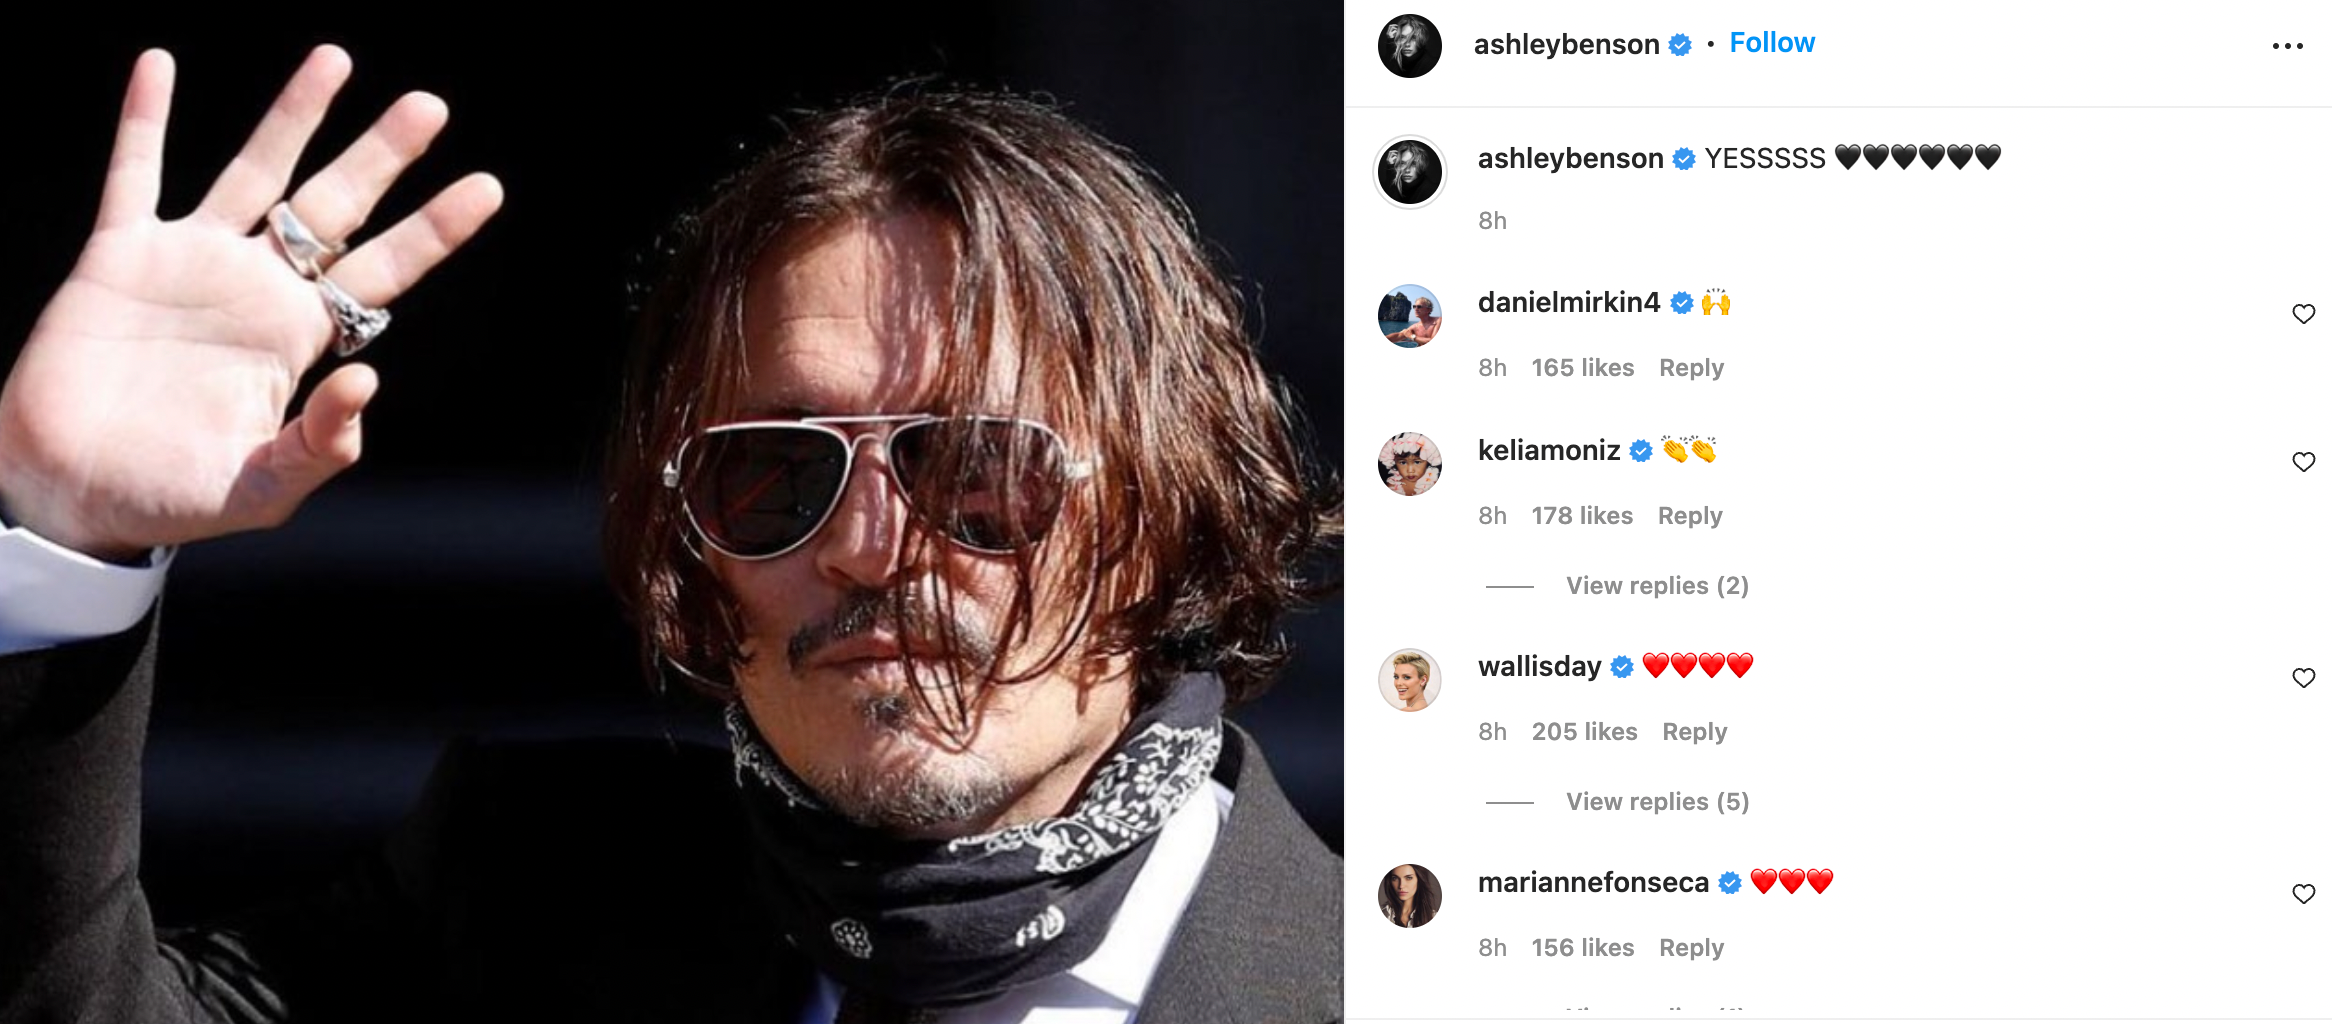 Ashley Benson shows her support for Johnny Depp